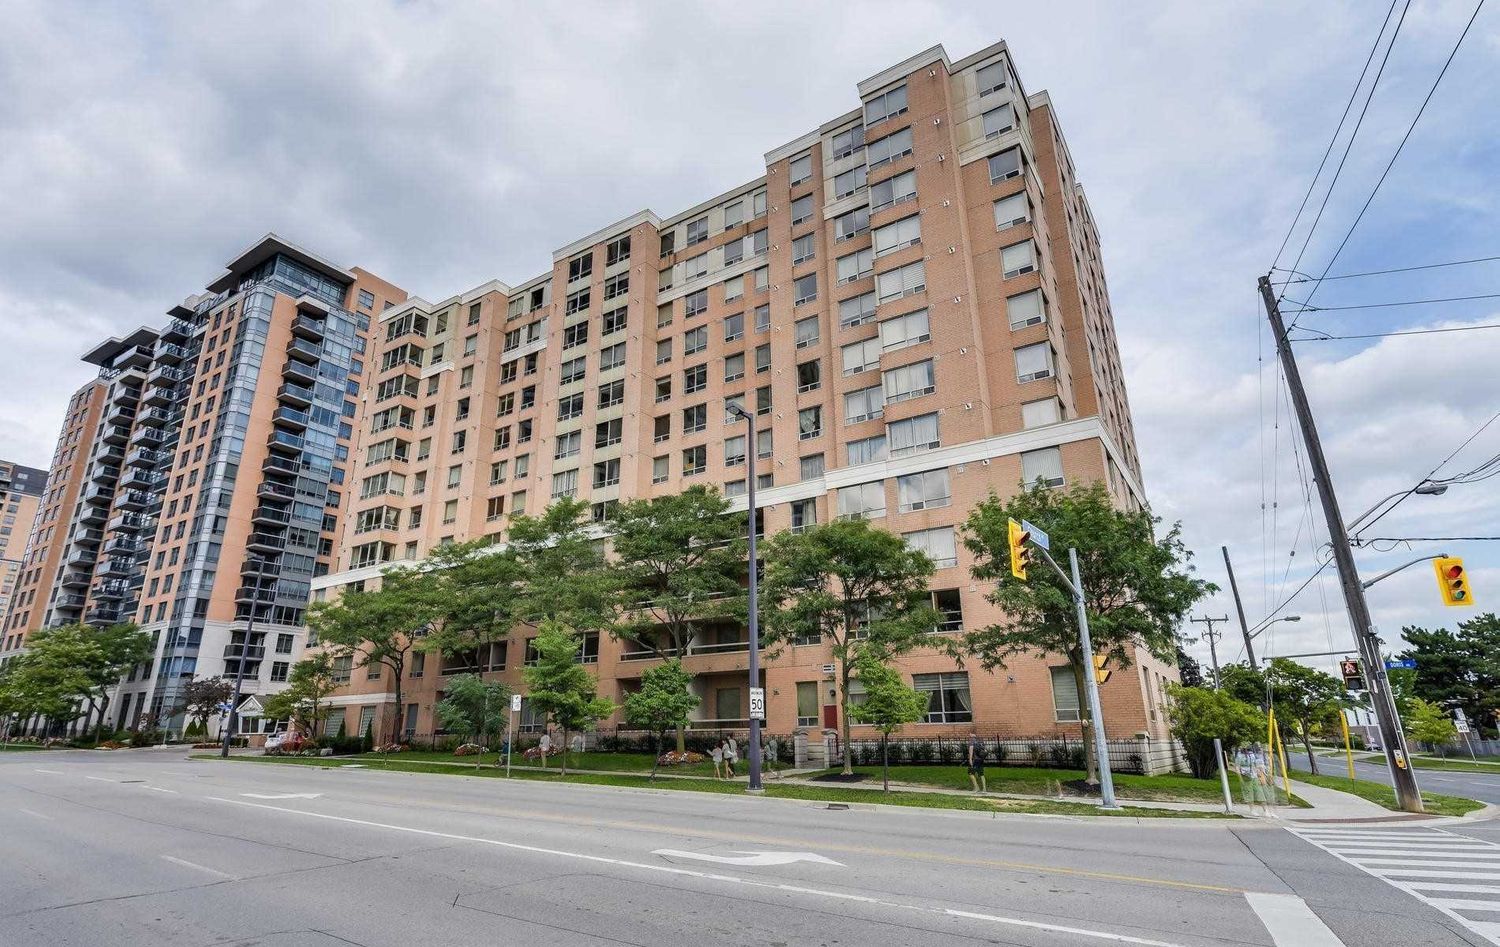 88 Grandview Way. Grandview at Northtown Condos is located in  North York, Toronto - image #1 of 2